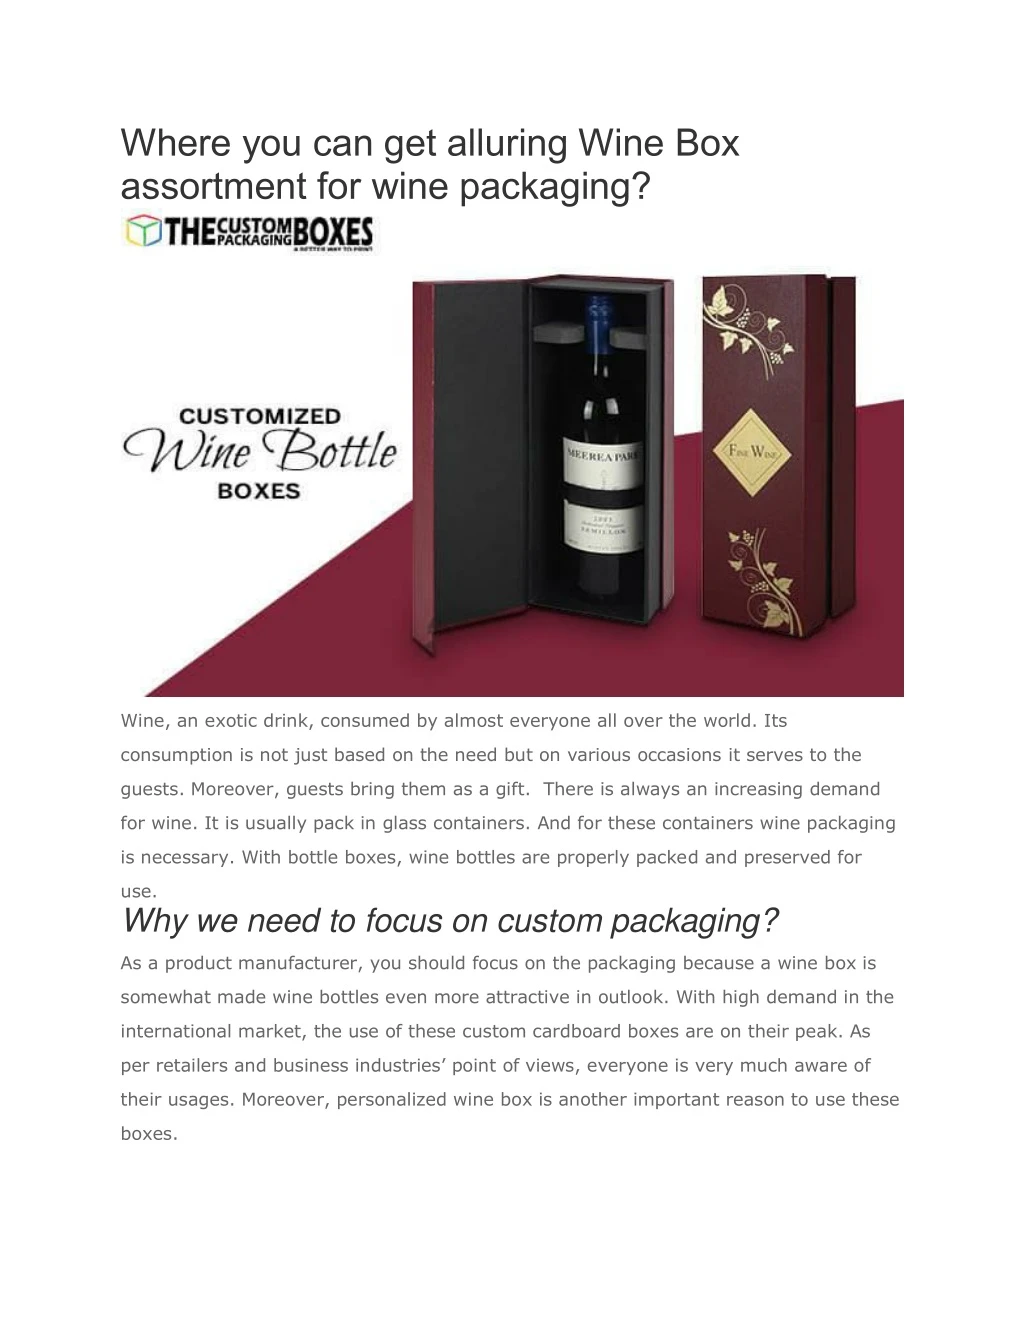 where you can get alluring wine box assortment